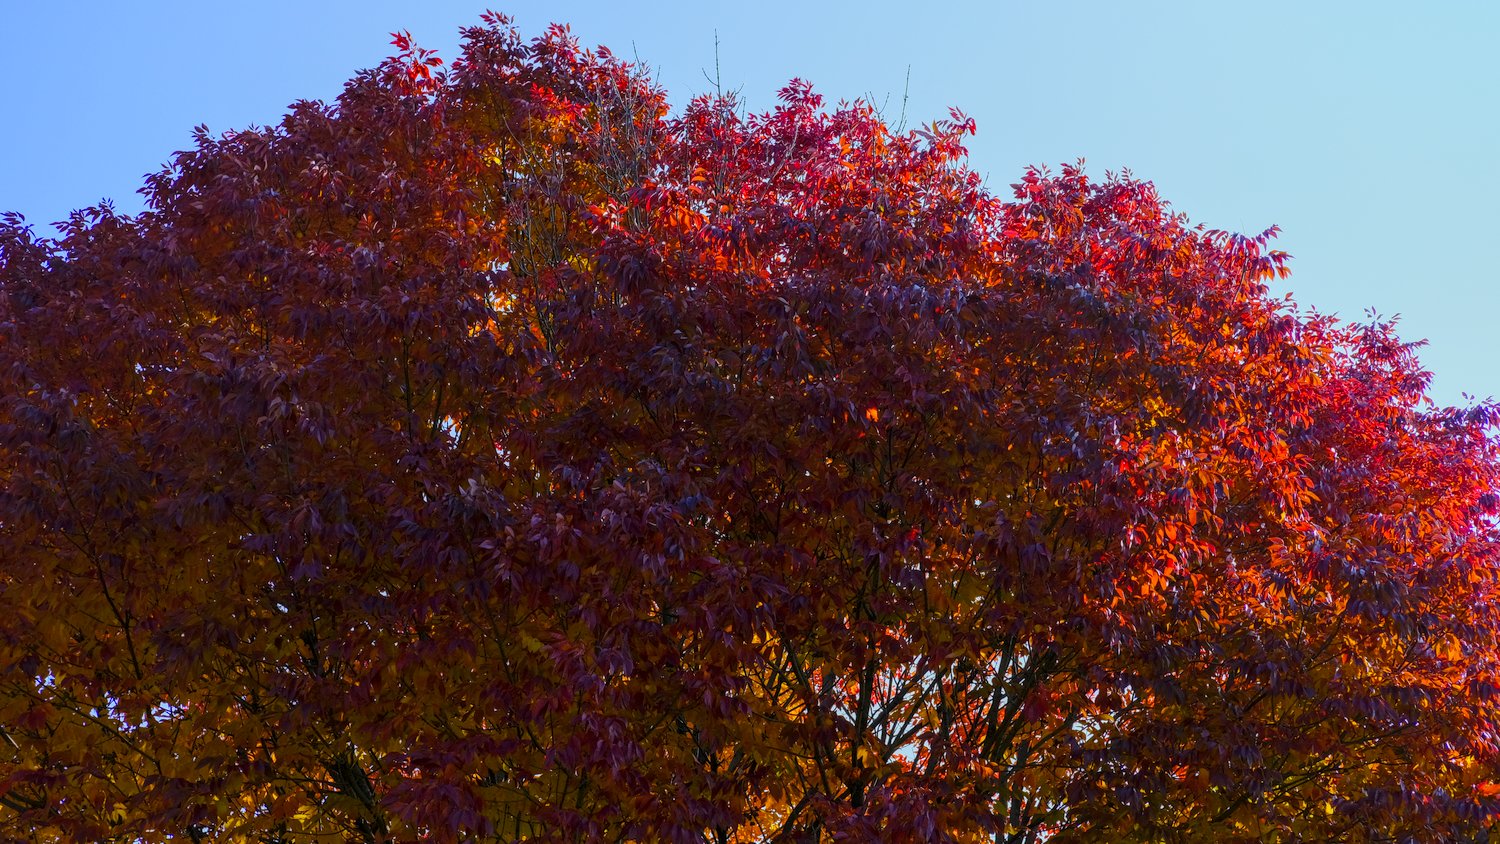 Rich red, orange, yellow, and purplish-red leaves in the trees.